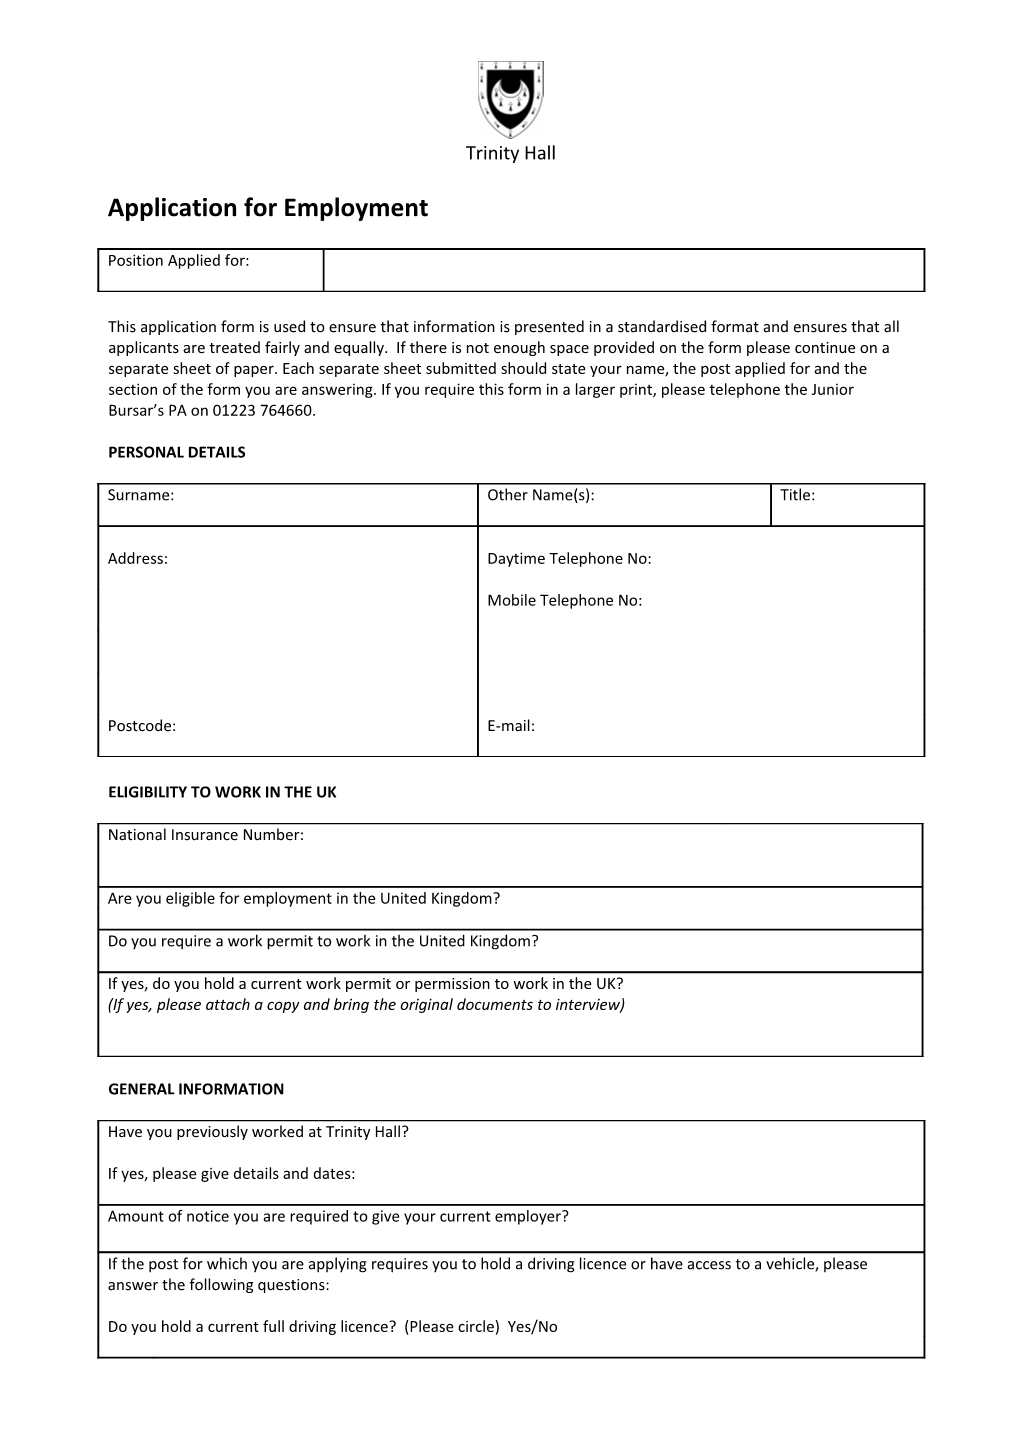 Application for Employment s8